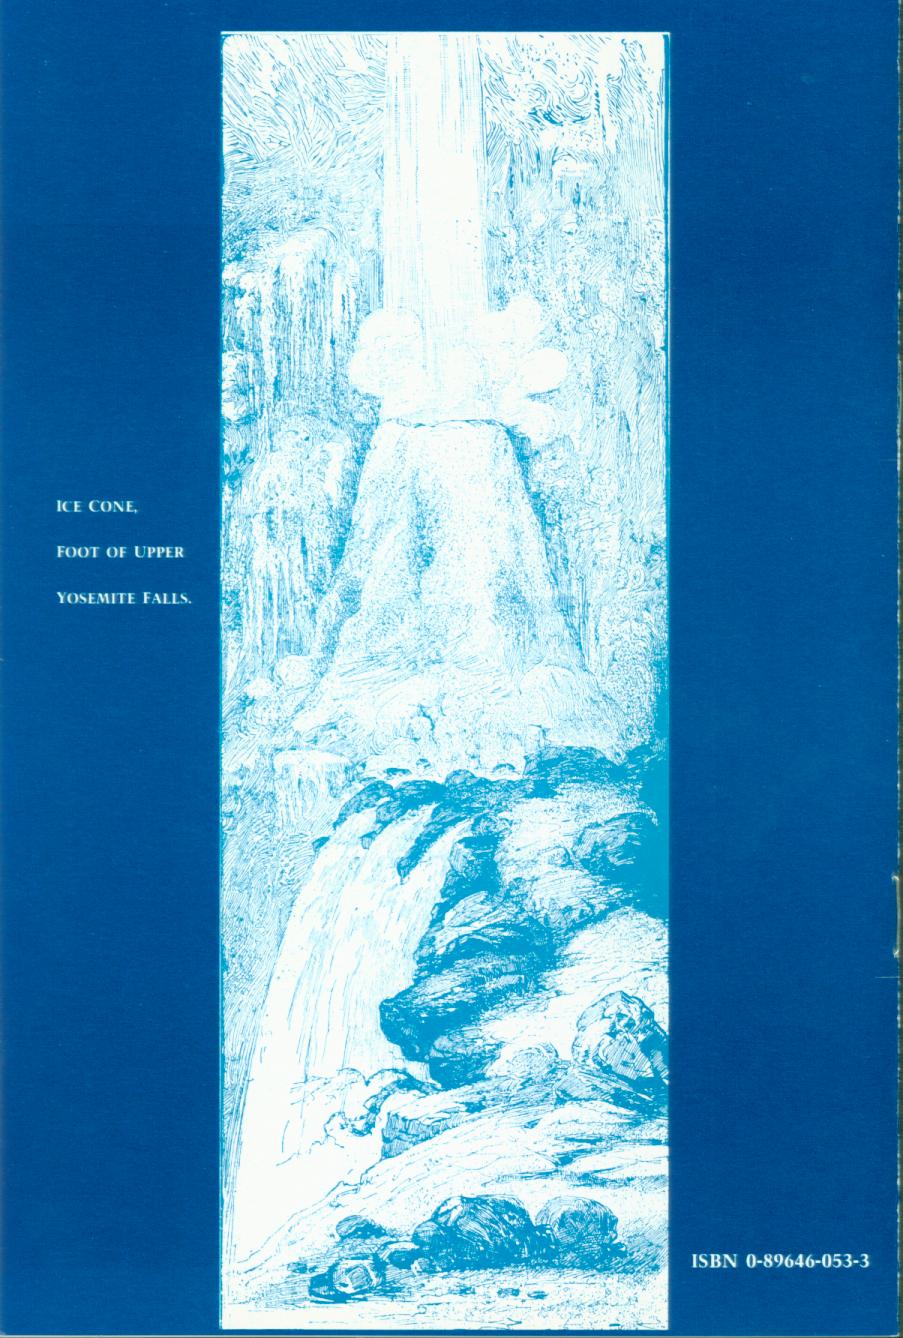 THE YOSEMITE IN WINTER: an 1892 account. vikst0053g